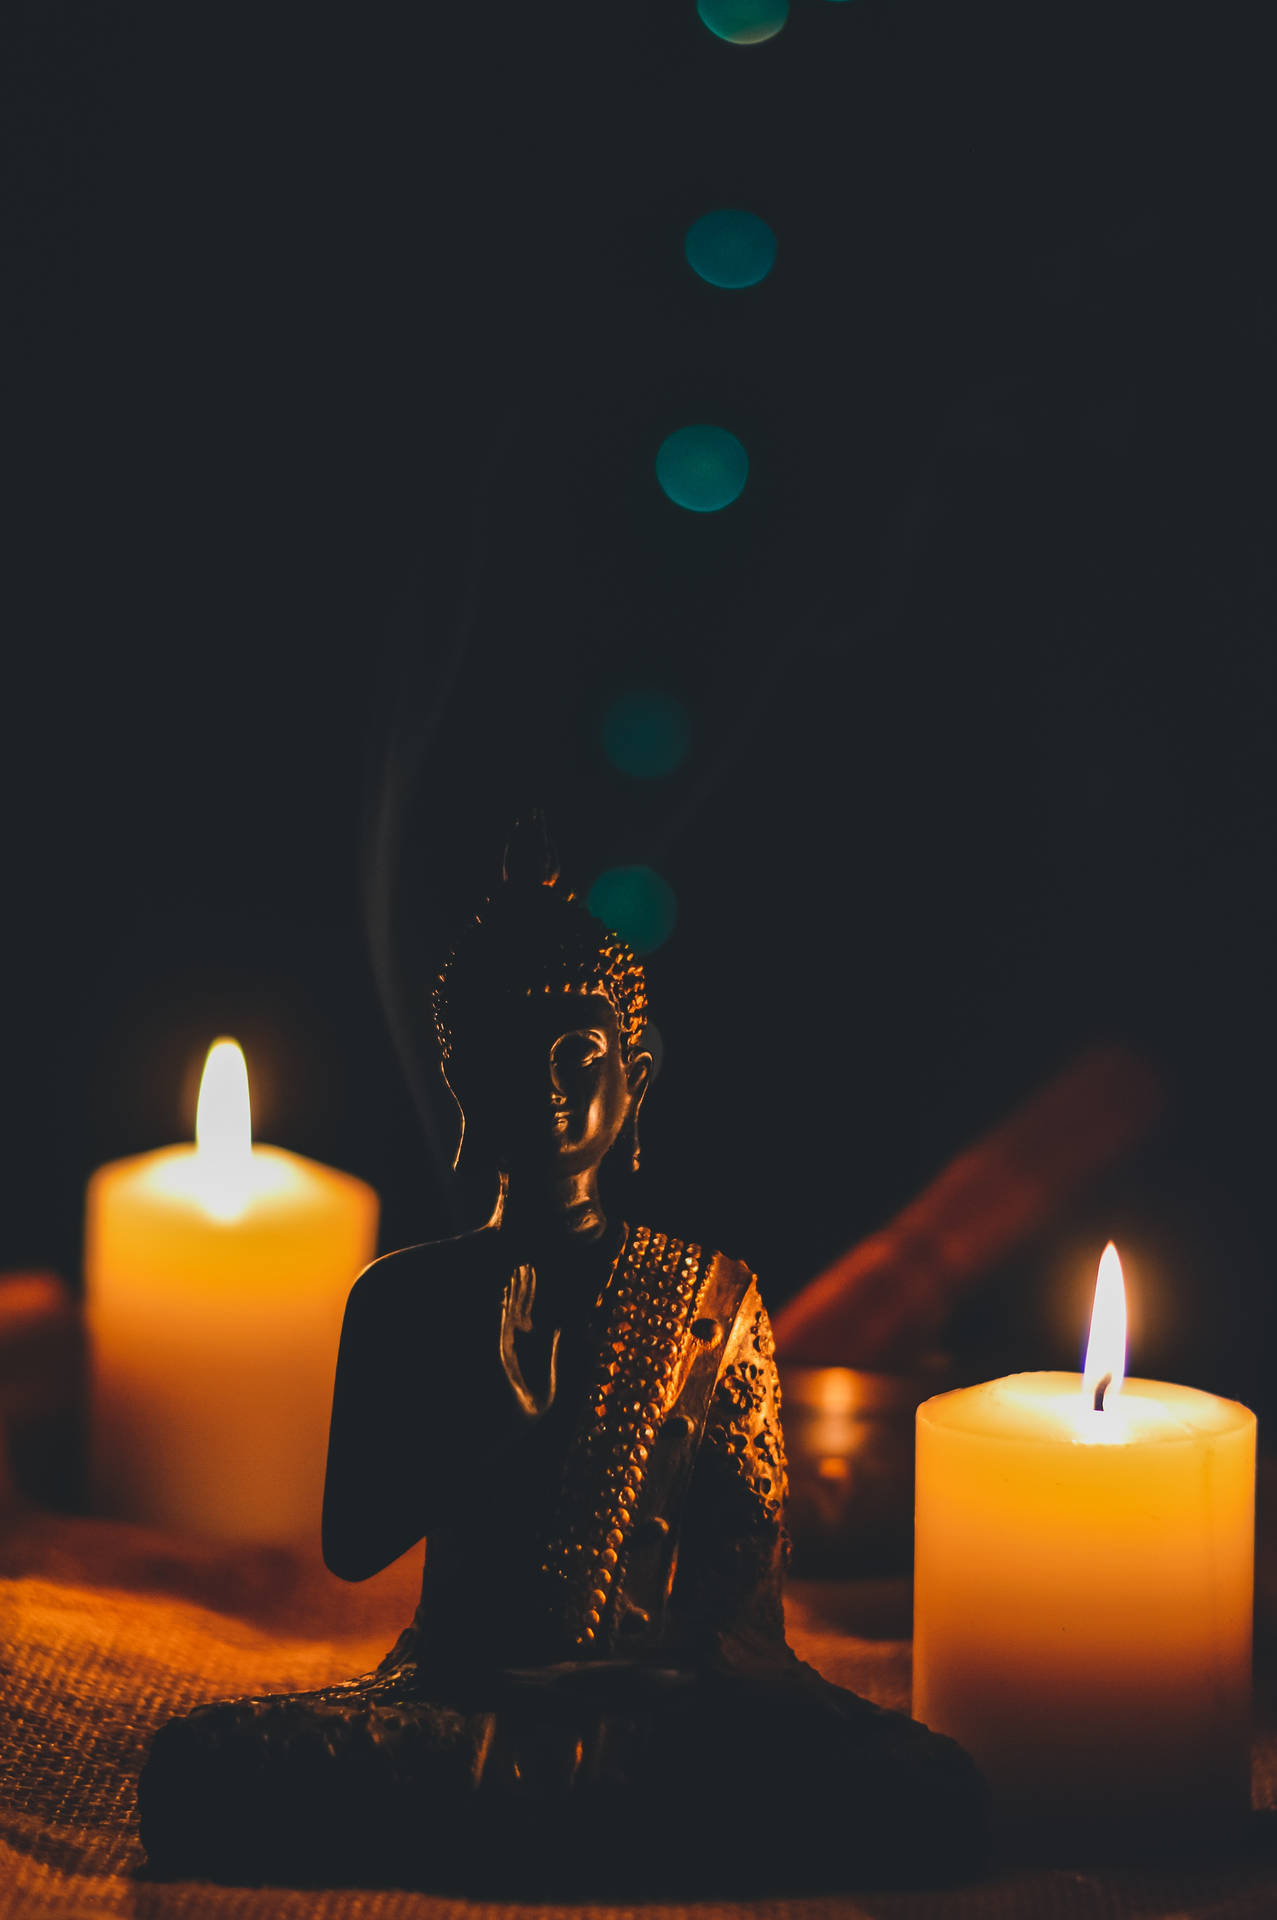 Buddha And Lighted Candles Wallpaper